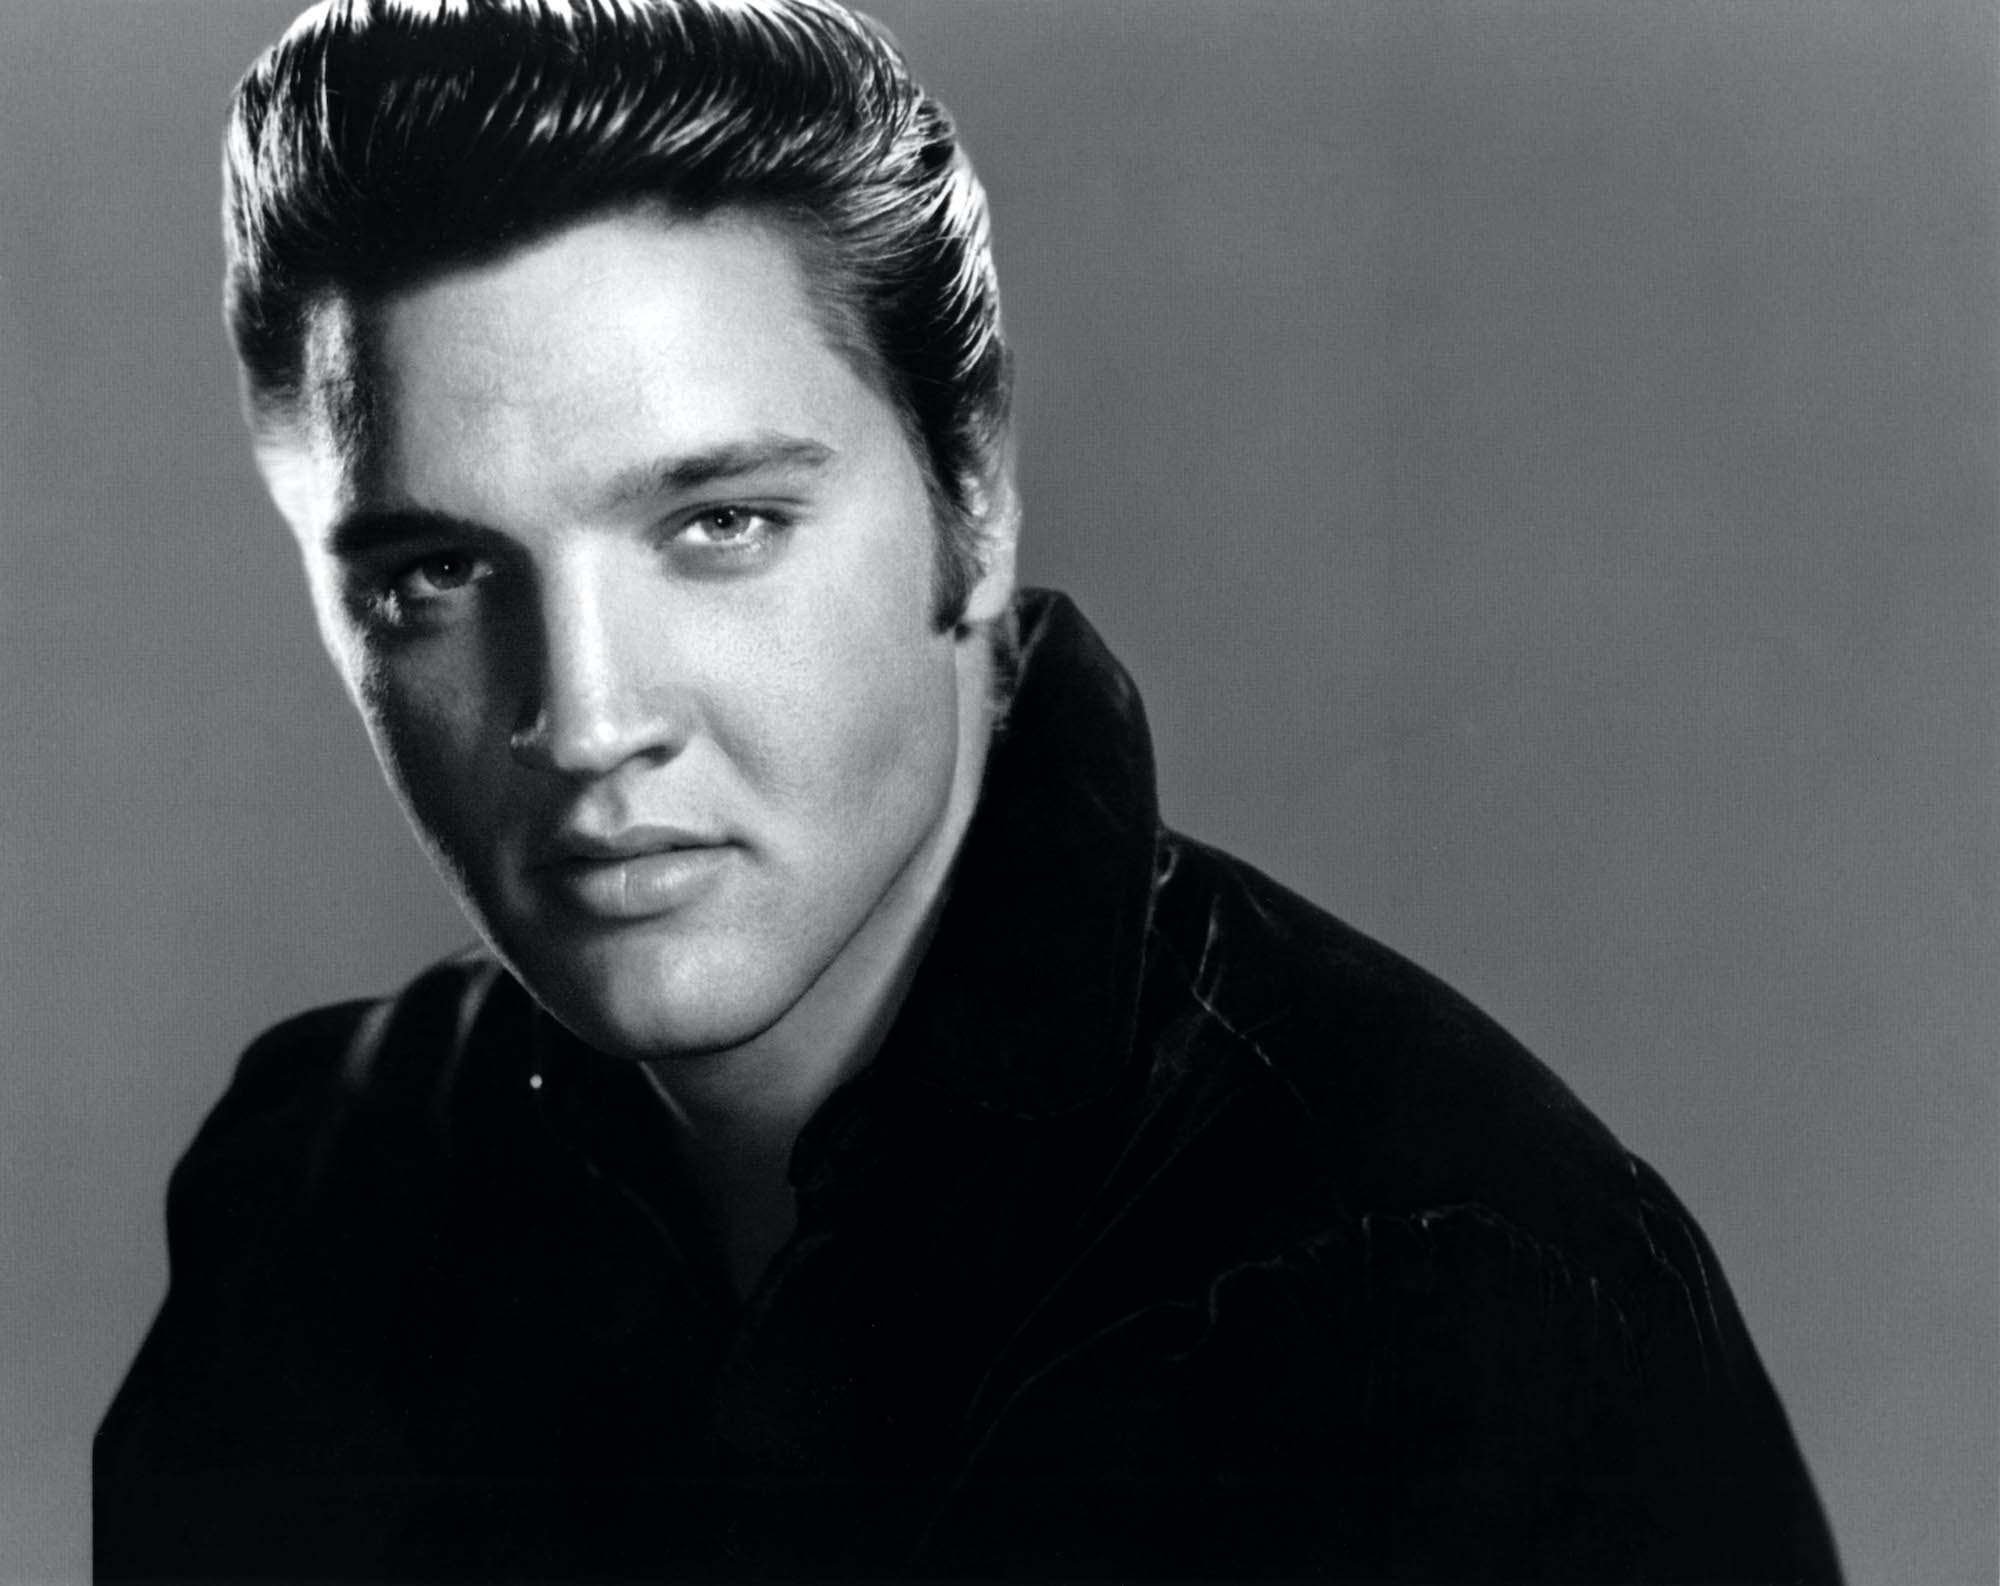 Elvis Presley looking at the camera, in black and white